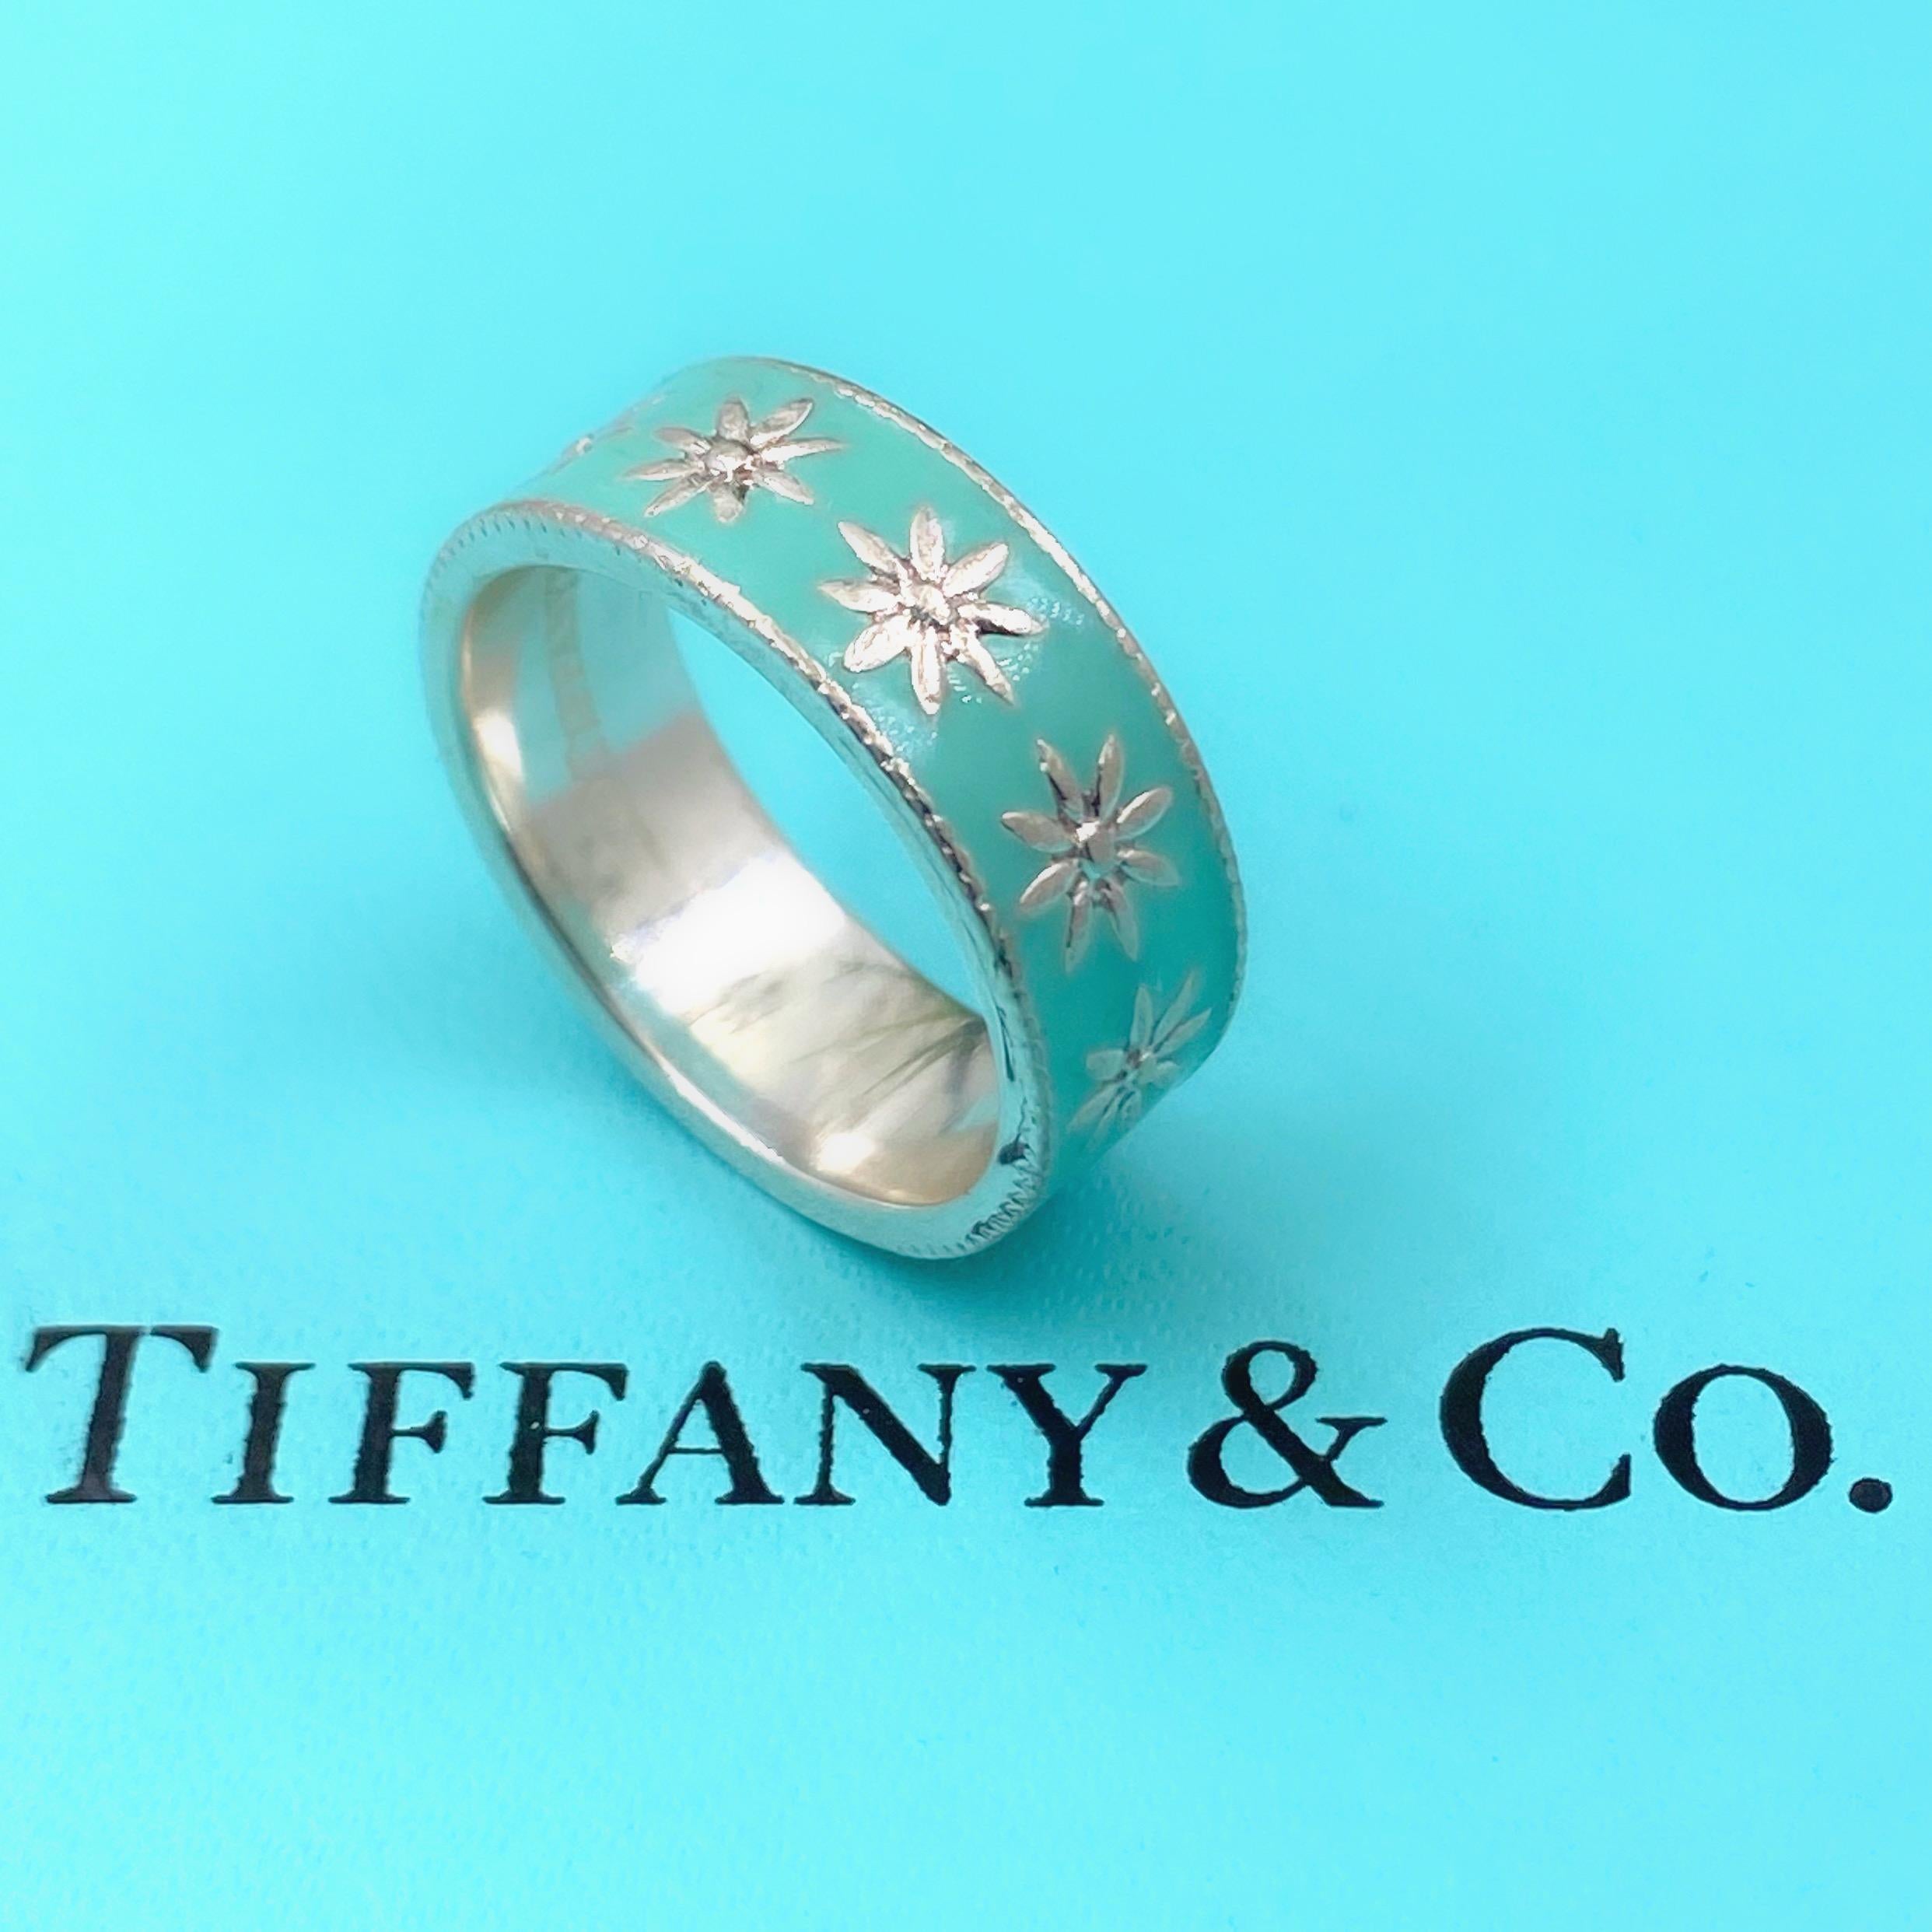 Tiffany & Co. Daisy Flower Ring
Style:  Band Ring
Metal:  Blue Enamel with Sterling Silver
Size:  5.75
Measurements:  10 MM Width
Hallmark:  ©TIFFANY&CO.AG925
Includes:  T&C Blue Box

Sku#1240TJK040119